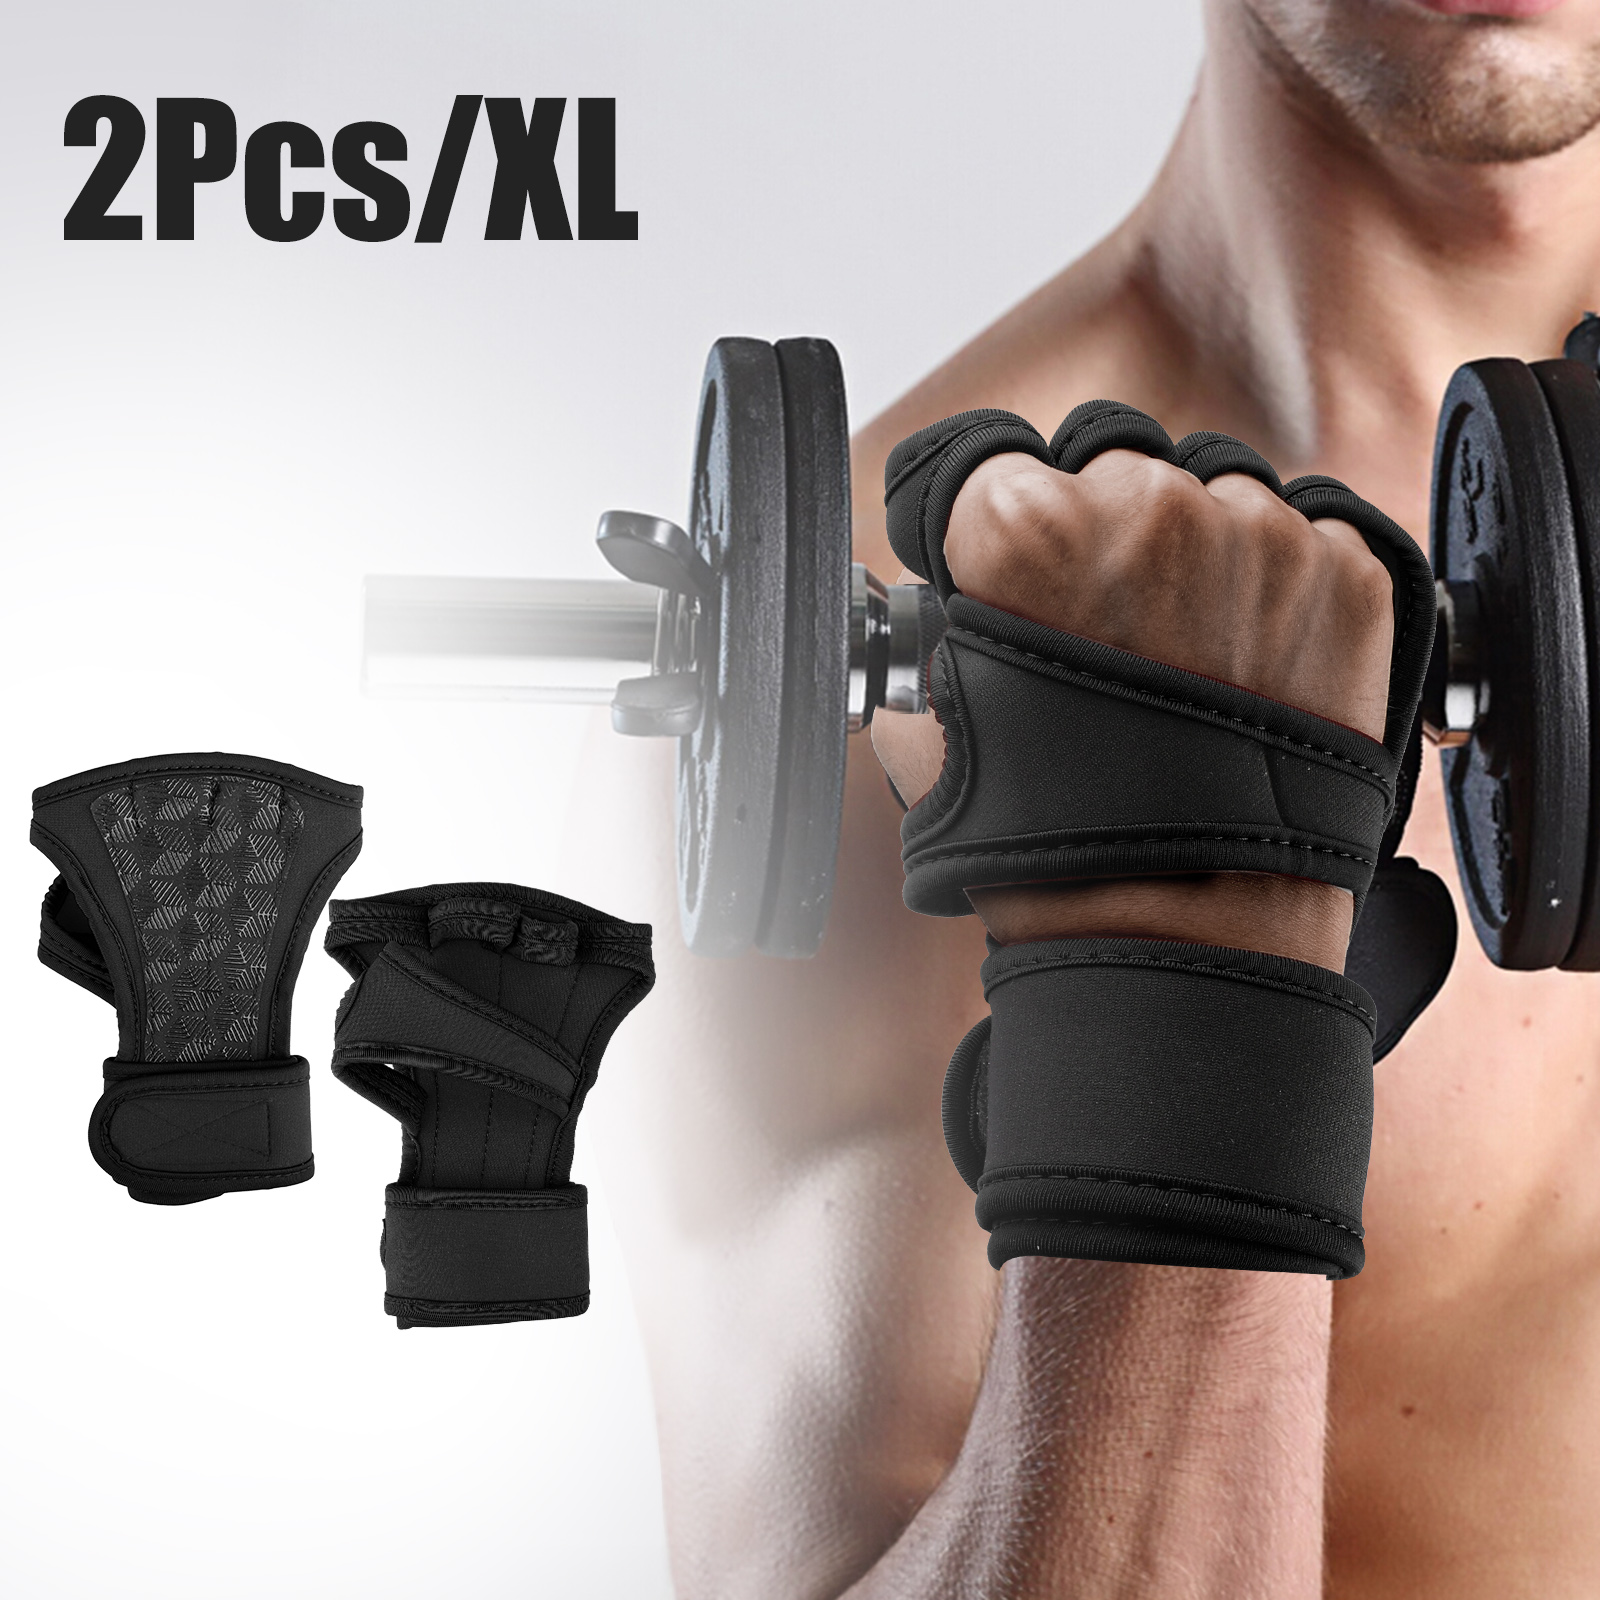 2PCS Workout Wrist Wrap Gloves for Gym Training Fitness Weight Lifting Men&Women 